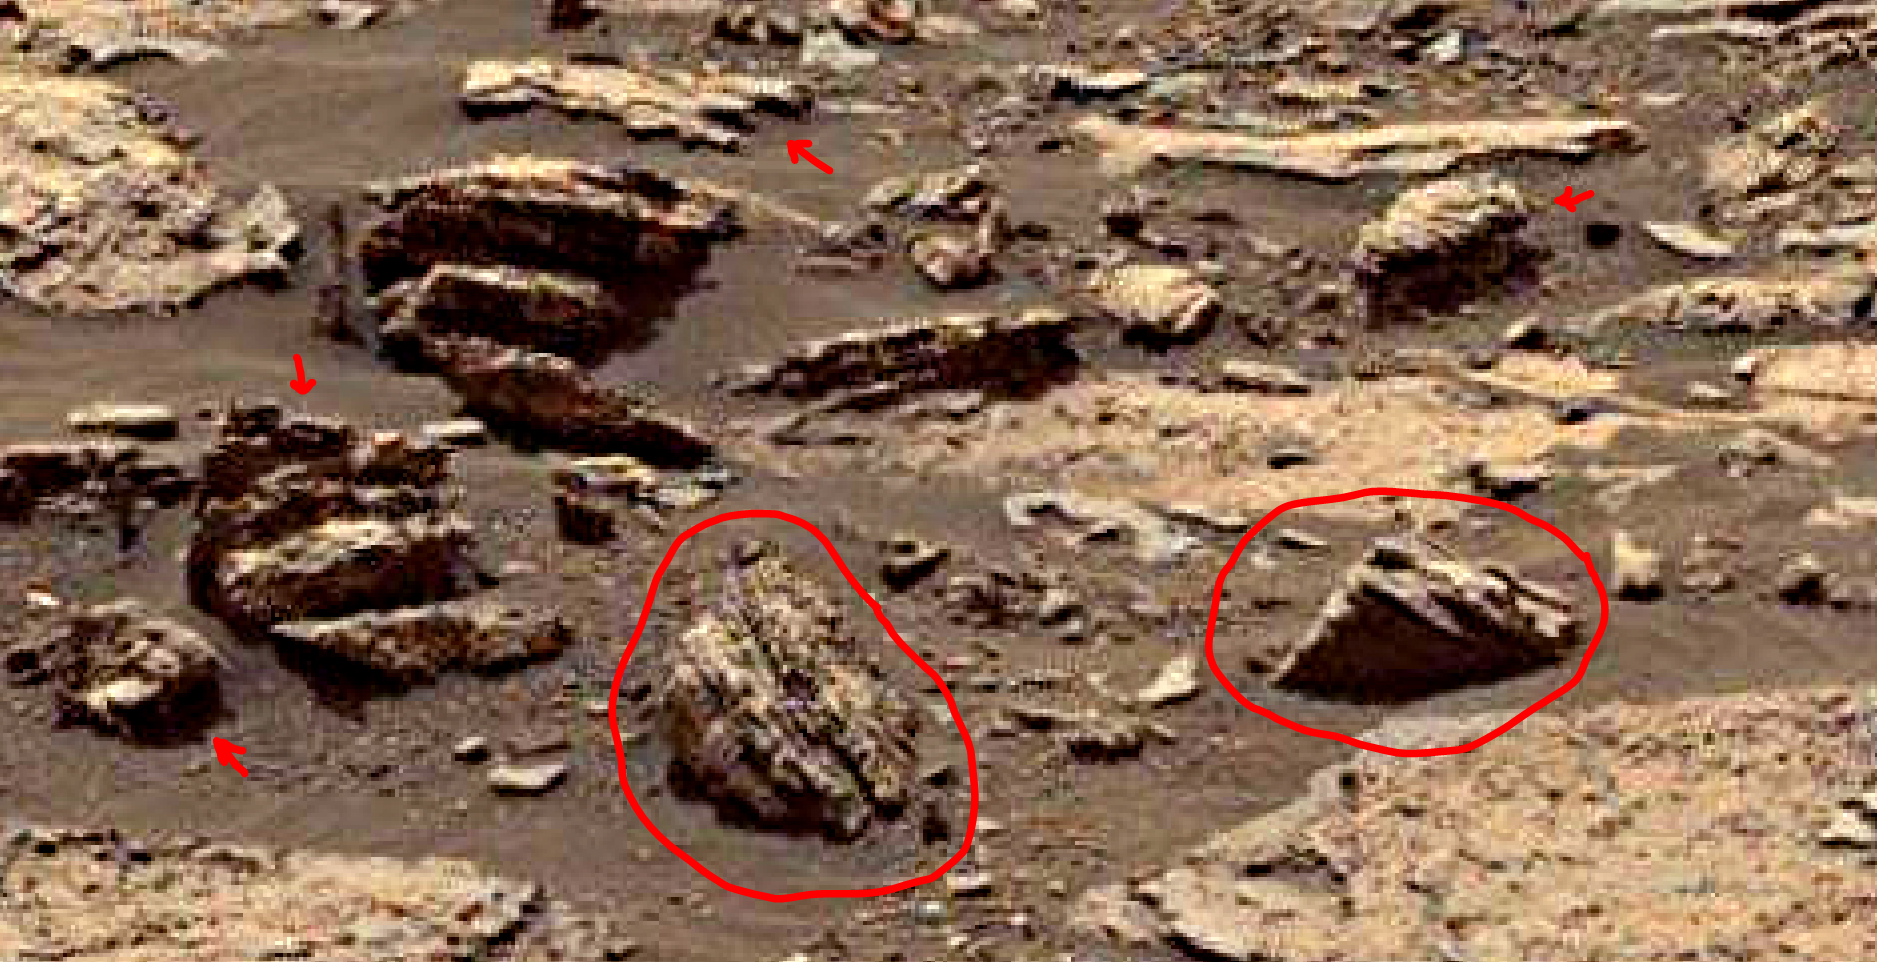 mars-sol-1485-anomaly-artifacts-14-was-life-on-mars